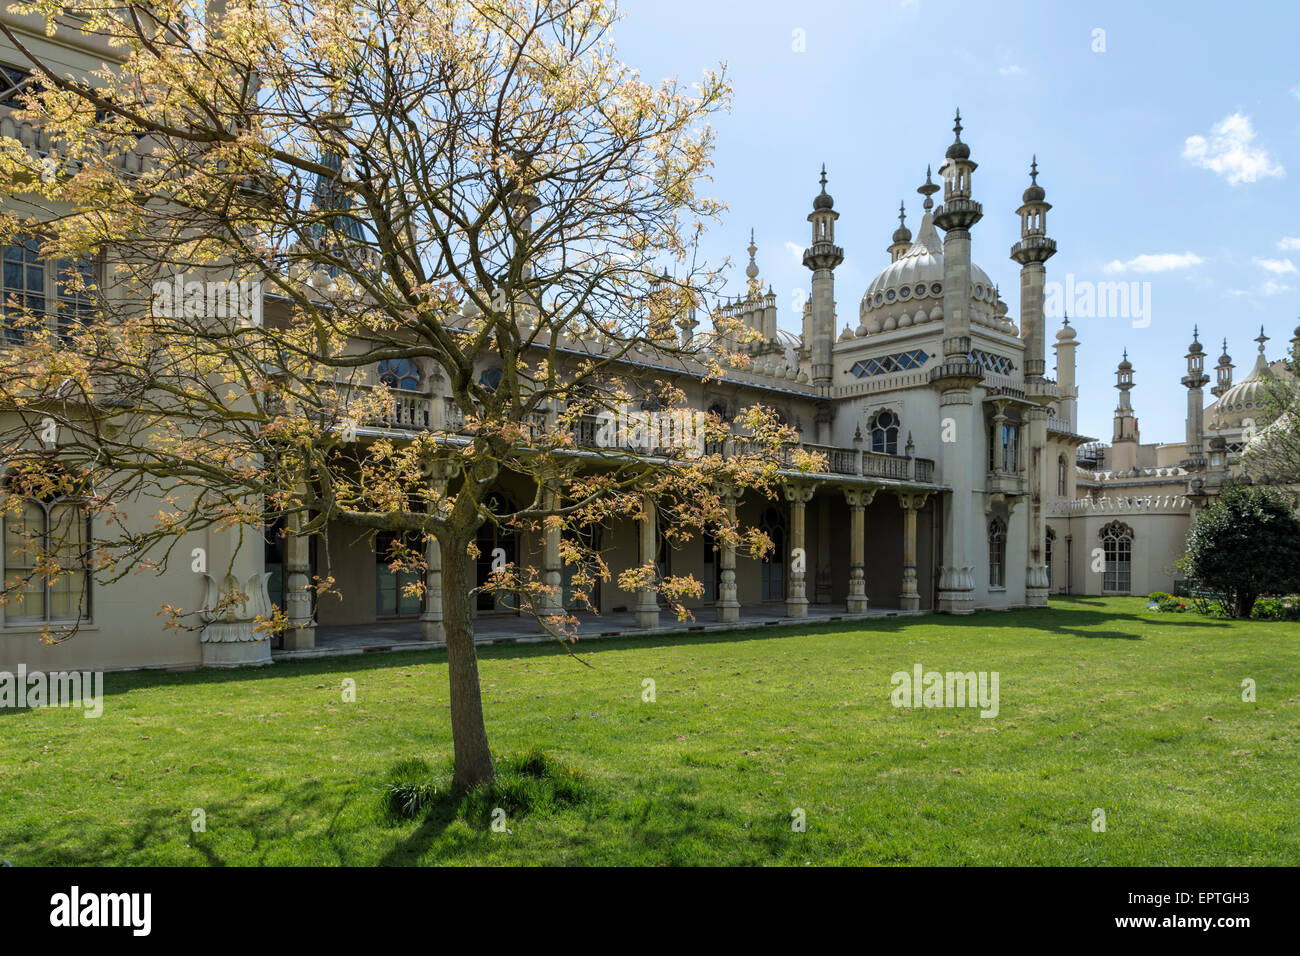 View on the Royal Pavilion, a former royal residence in Brighton, East Sussex, England, UK. It's a UNESCO World Heritage Site. Stock Photo